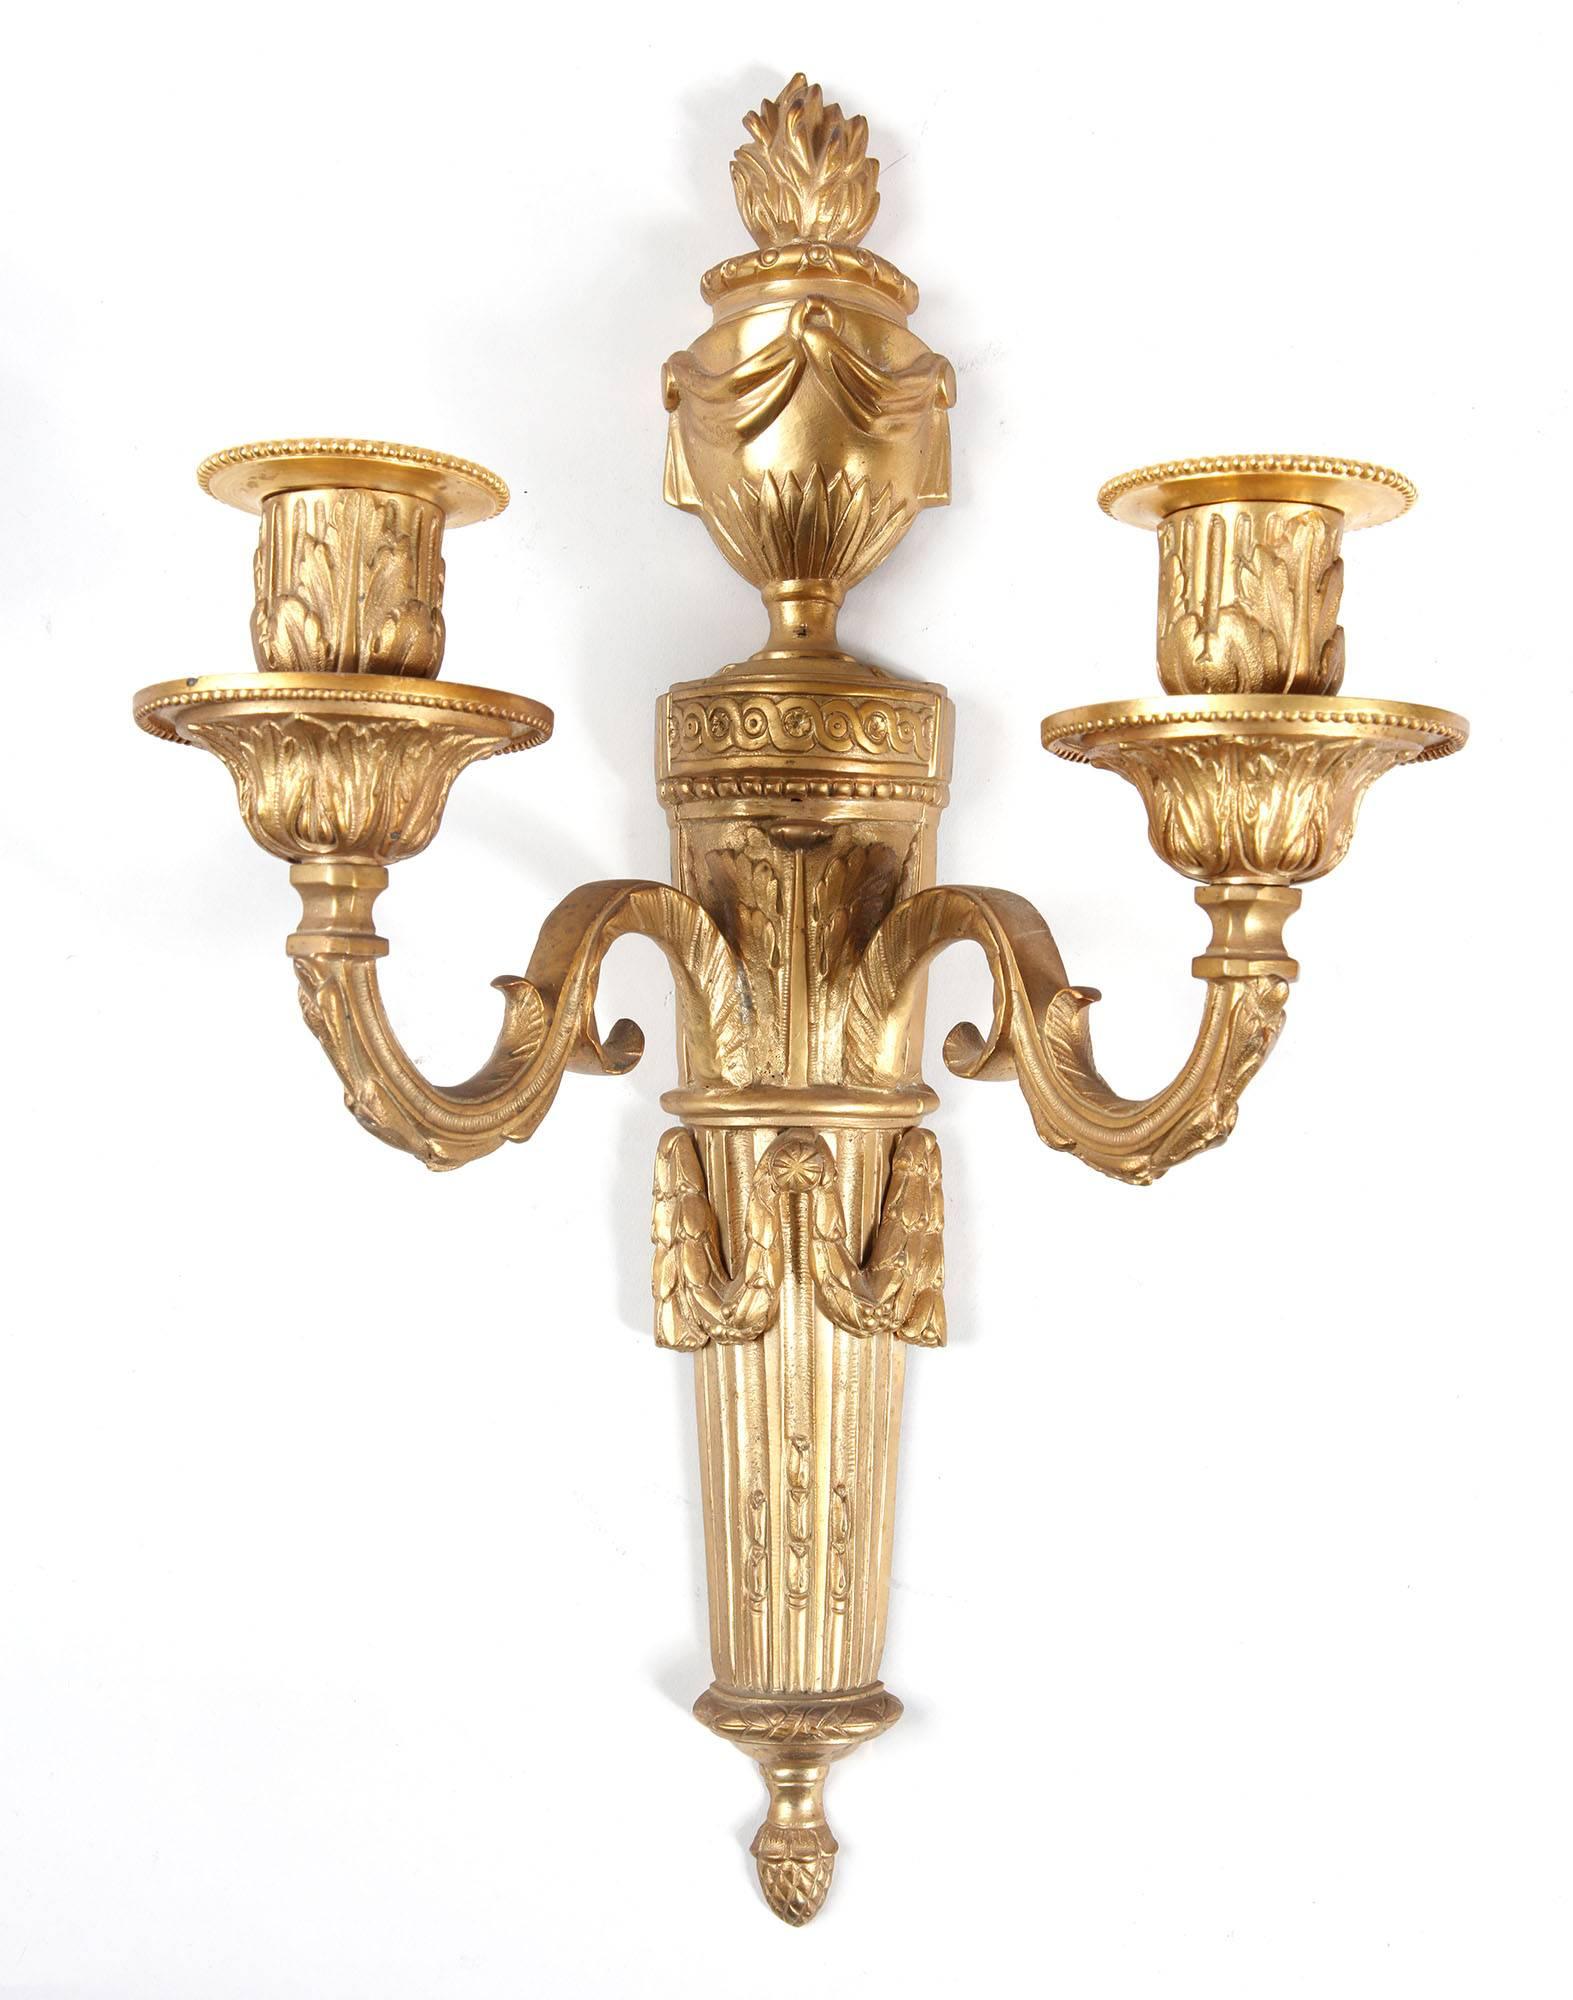 A pair of two-light flaming urn wall appliques
France, circa 1900

Measures: 42 cm high, 24.5 cm wide.